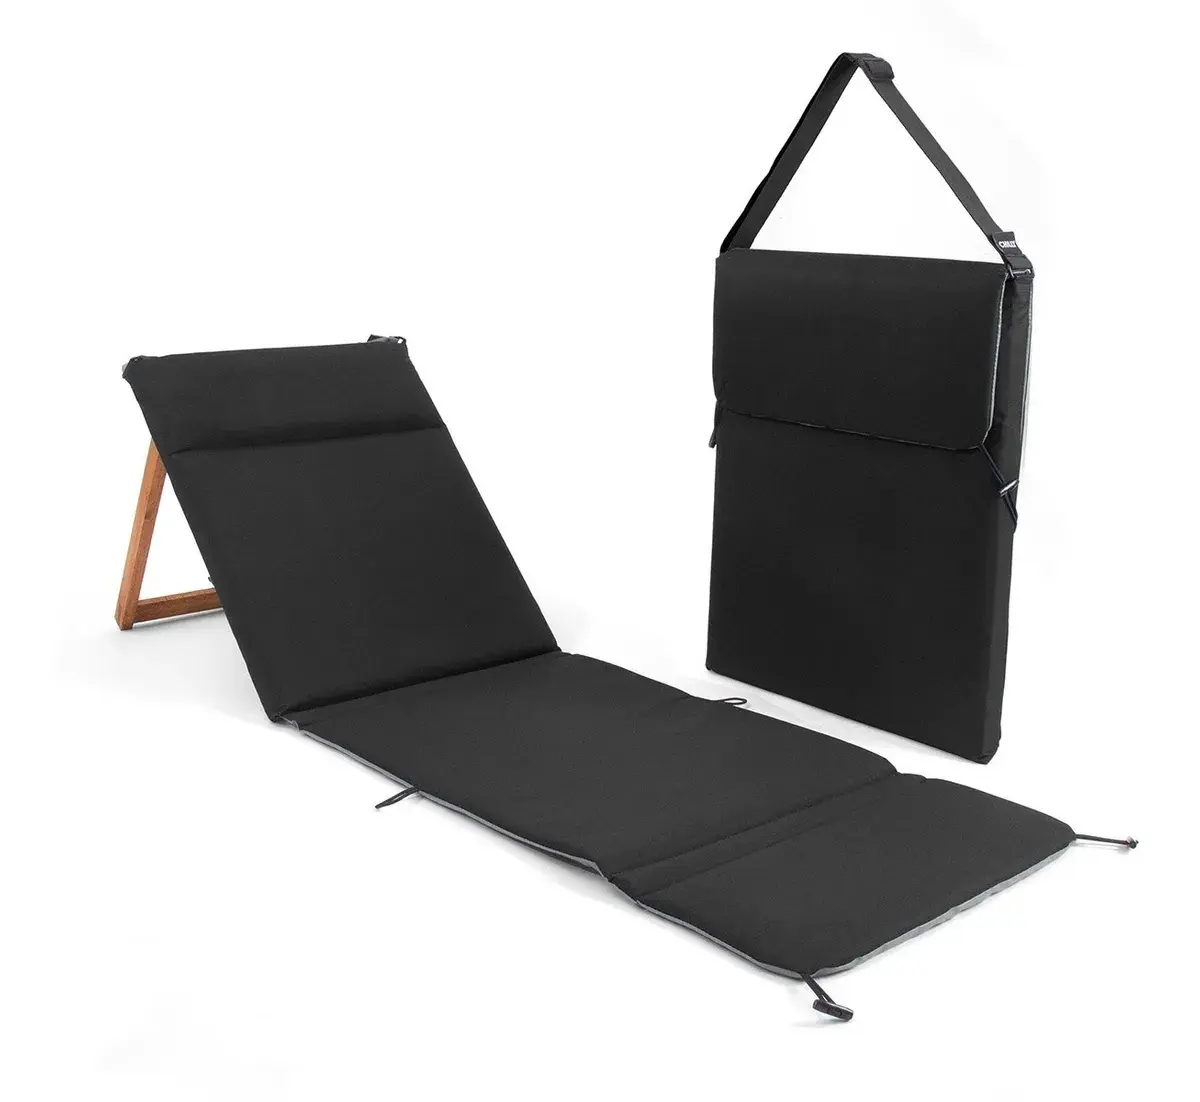 low lightweight compact wood outdoor picnic camping back rest foldable reclining sun lounger folding portable beach chair